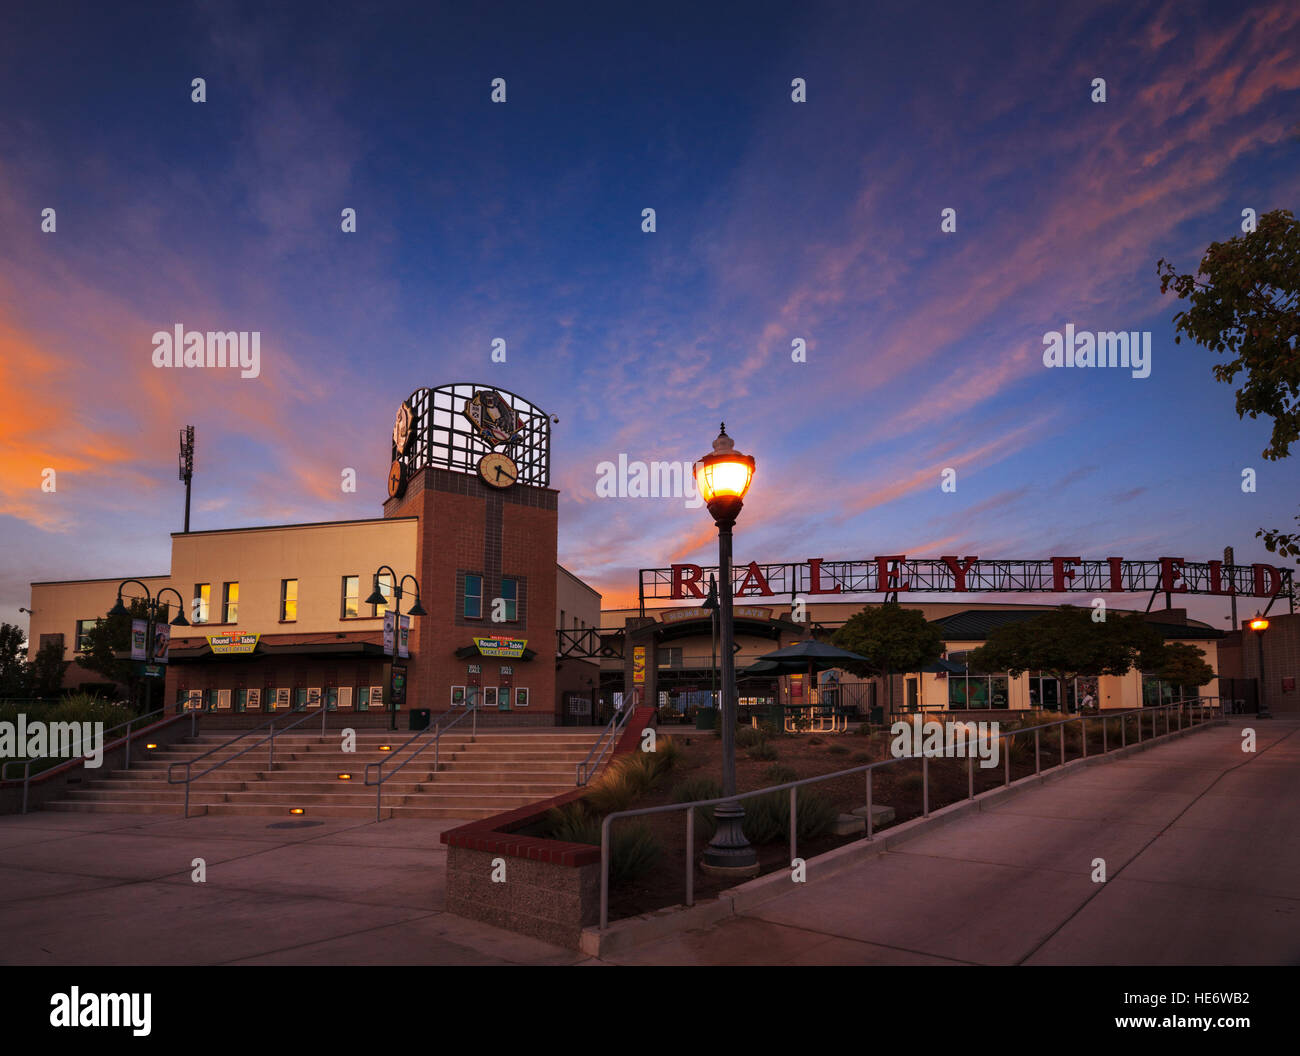 Raley Field Sunset Banque D'Images